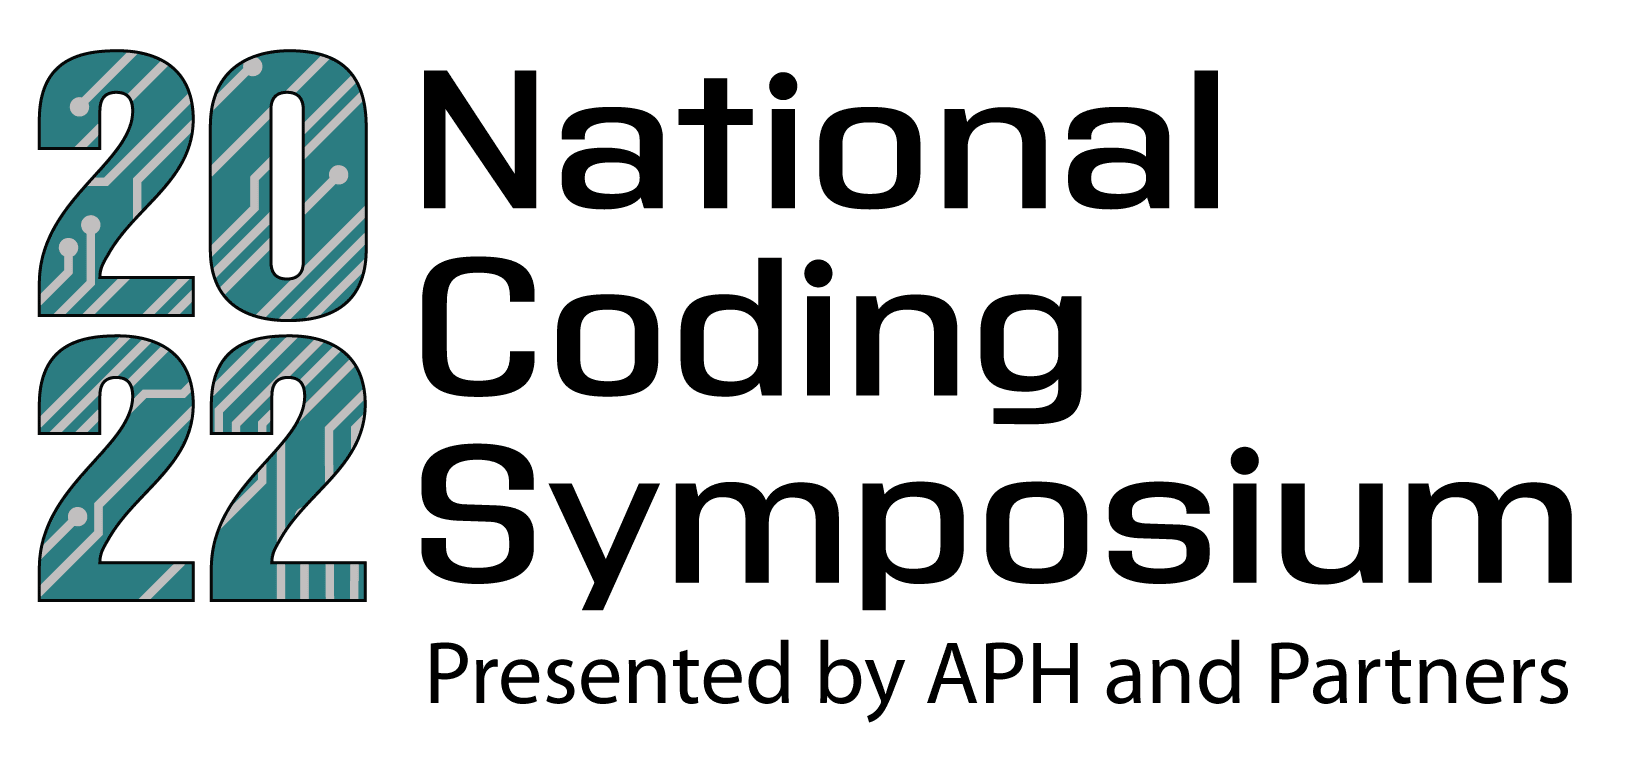 2022 National Coding Symposium logo. The numbers “2022” are teal and have a gray circuit board pattern across them. Text below reads "Presented by APH and Partners"